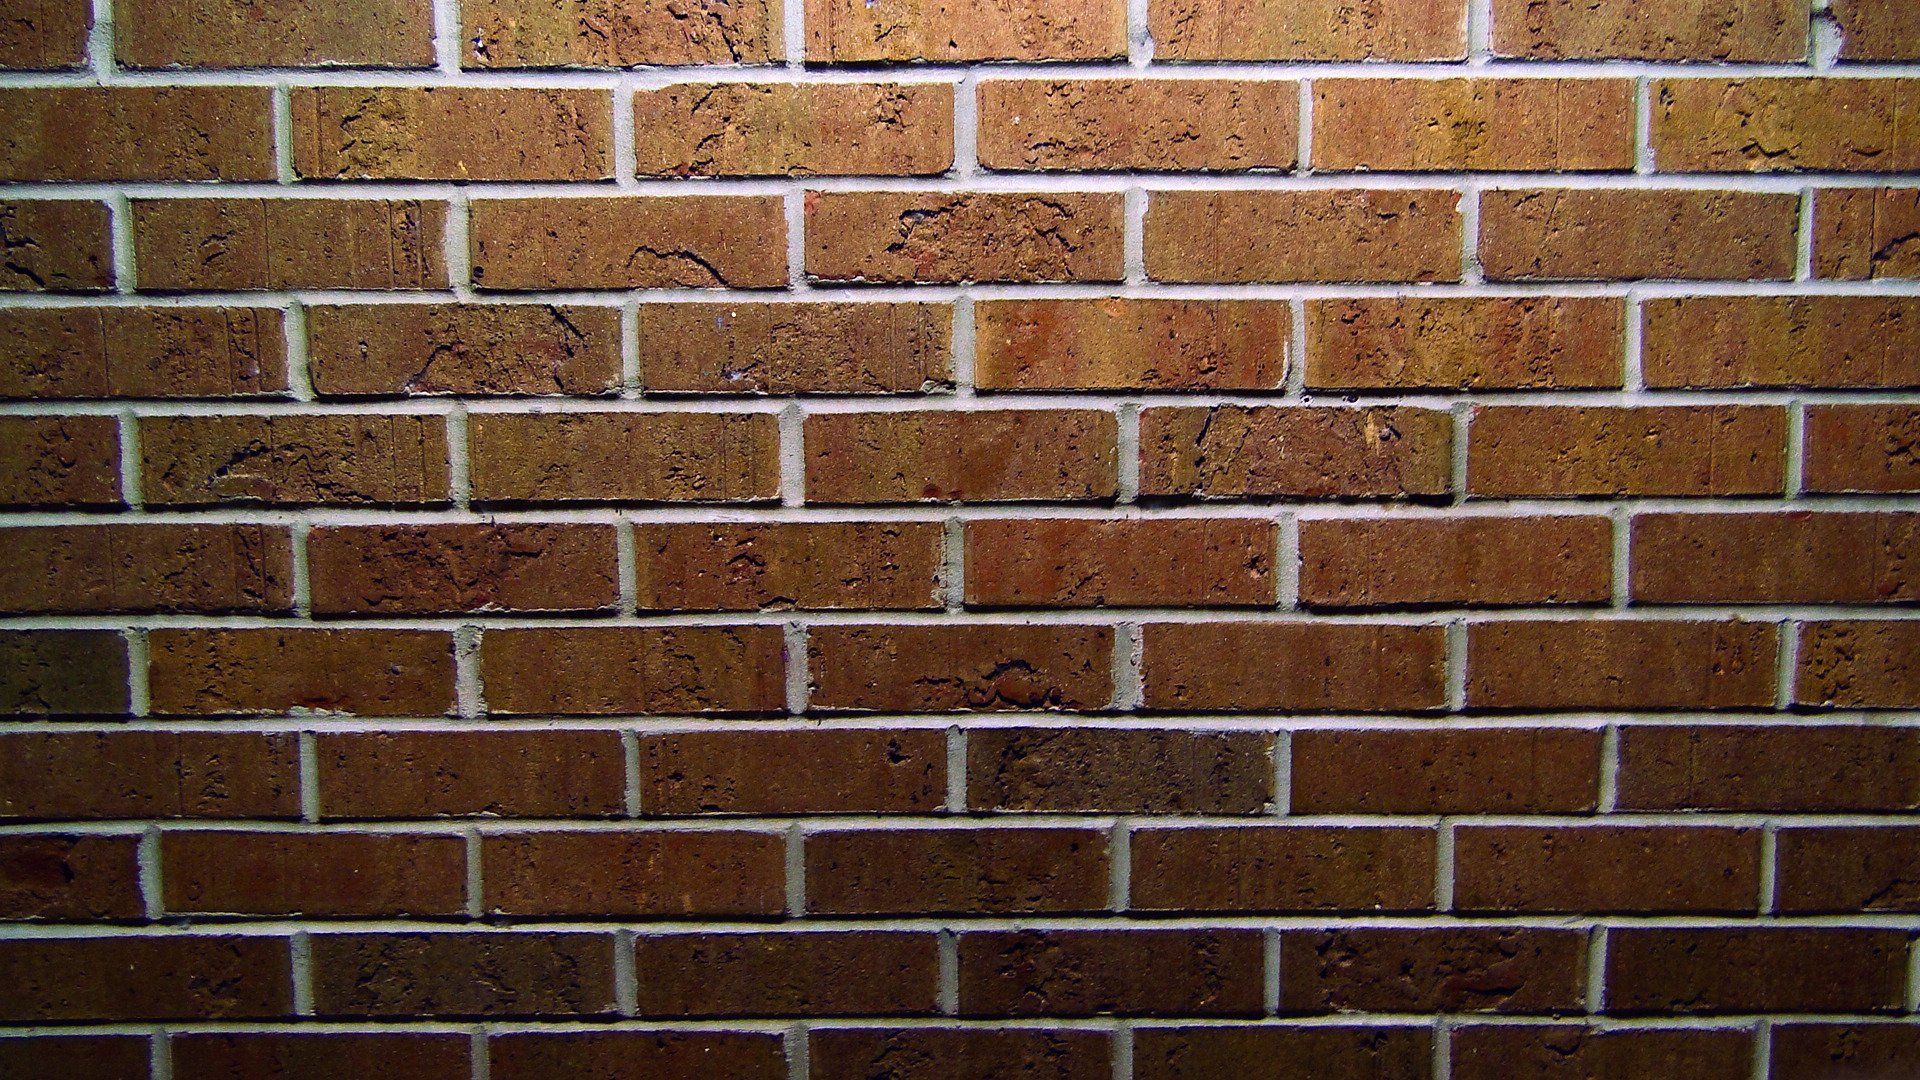 Wall Hd picture image